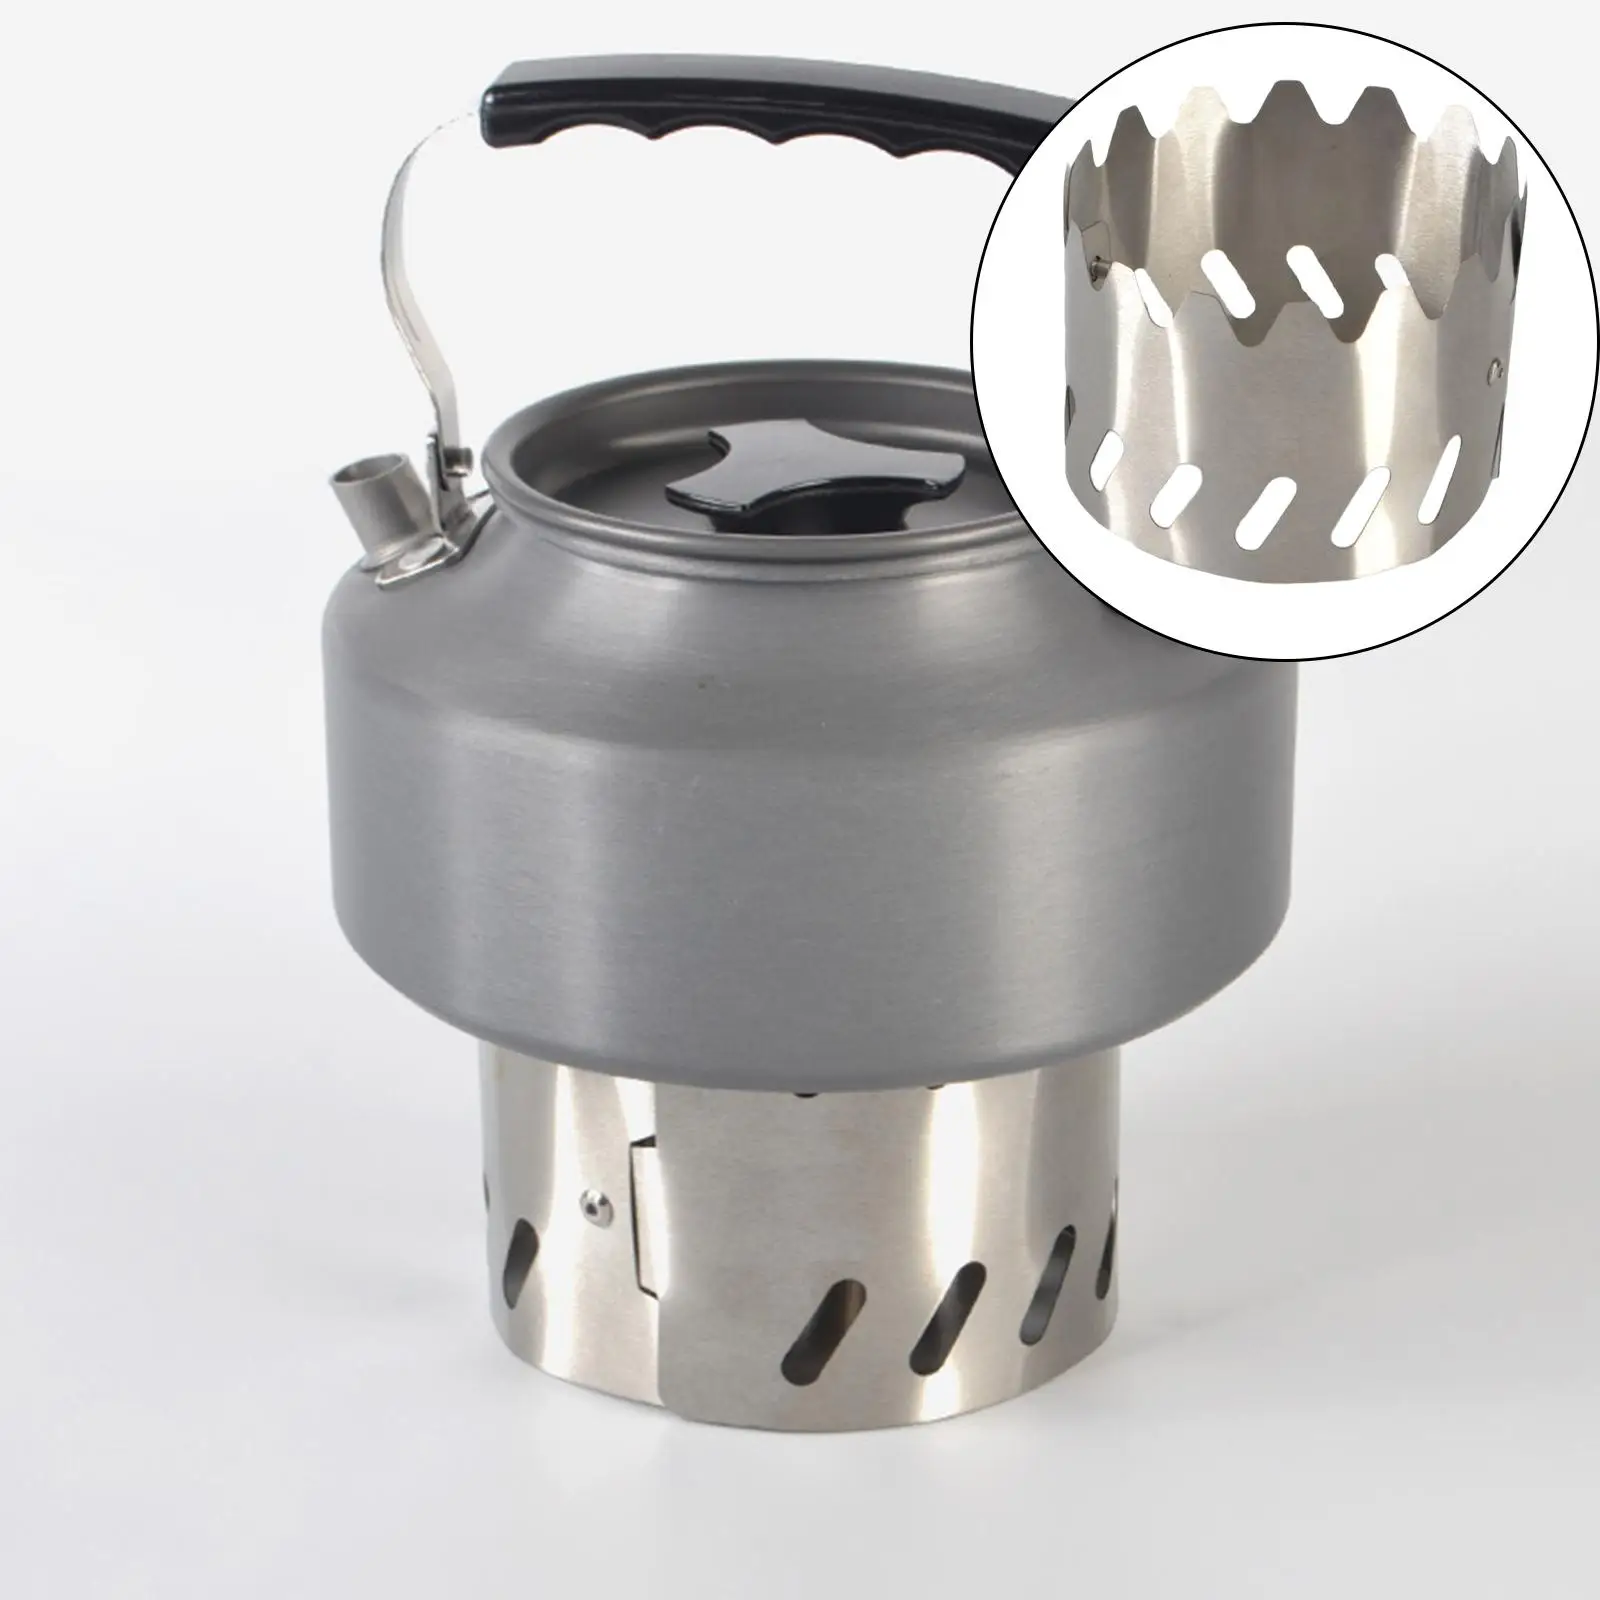 Ultralight Alcohol Stove Rack Pot Stove Stand Stainless Steel for Outdoor